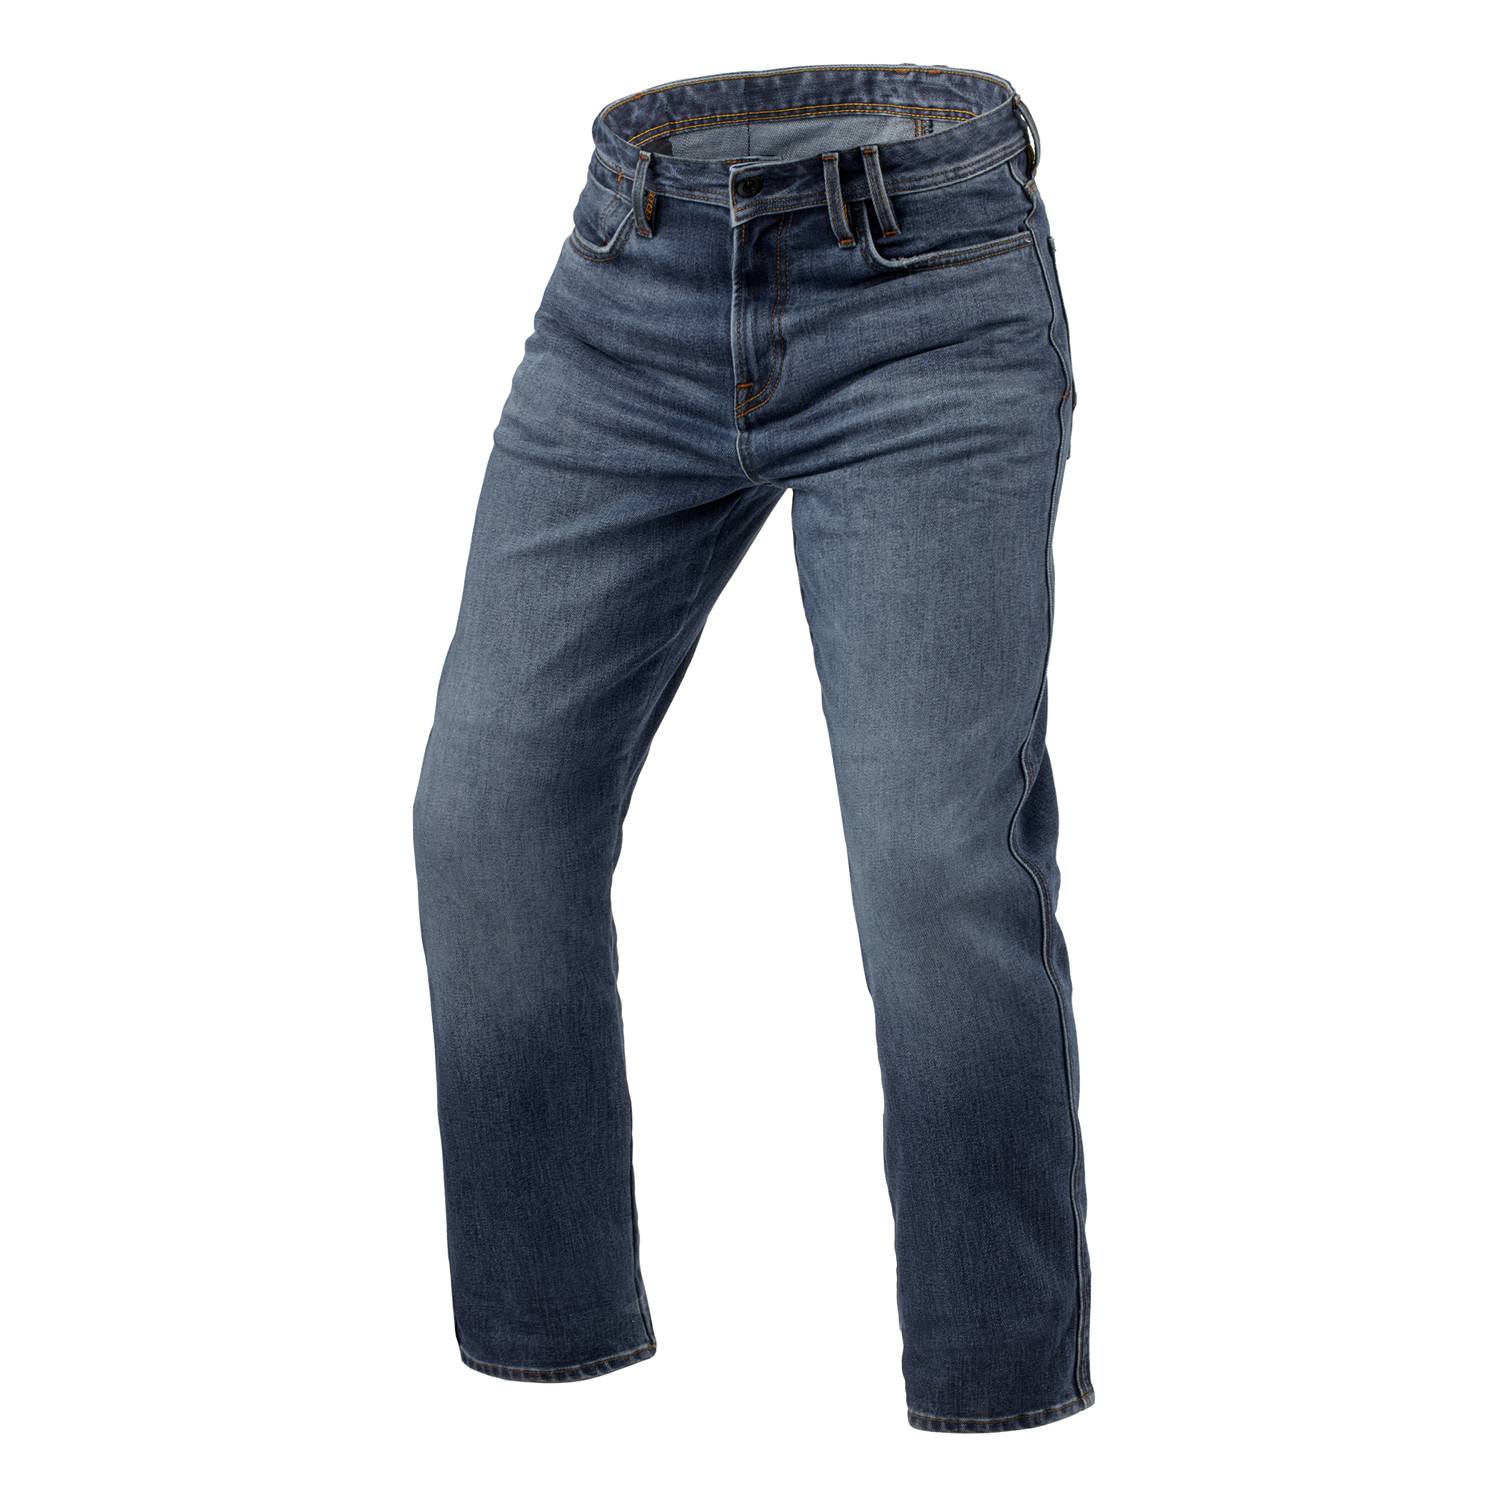 Image of REV'IT! Jeans Lombard 3 RF Medium Blue Stone L36 Motorcycle Jeans Size L36/W31 ID 8700001376099